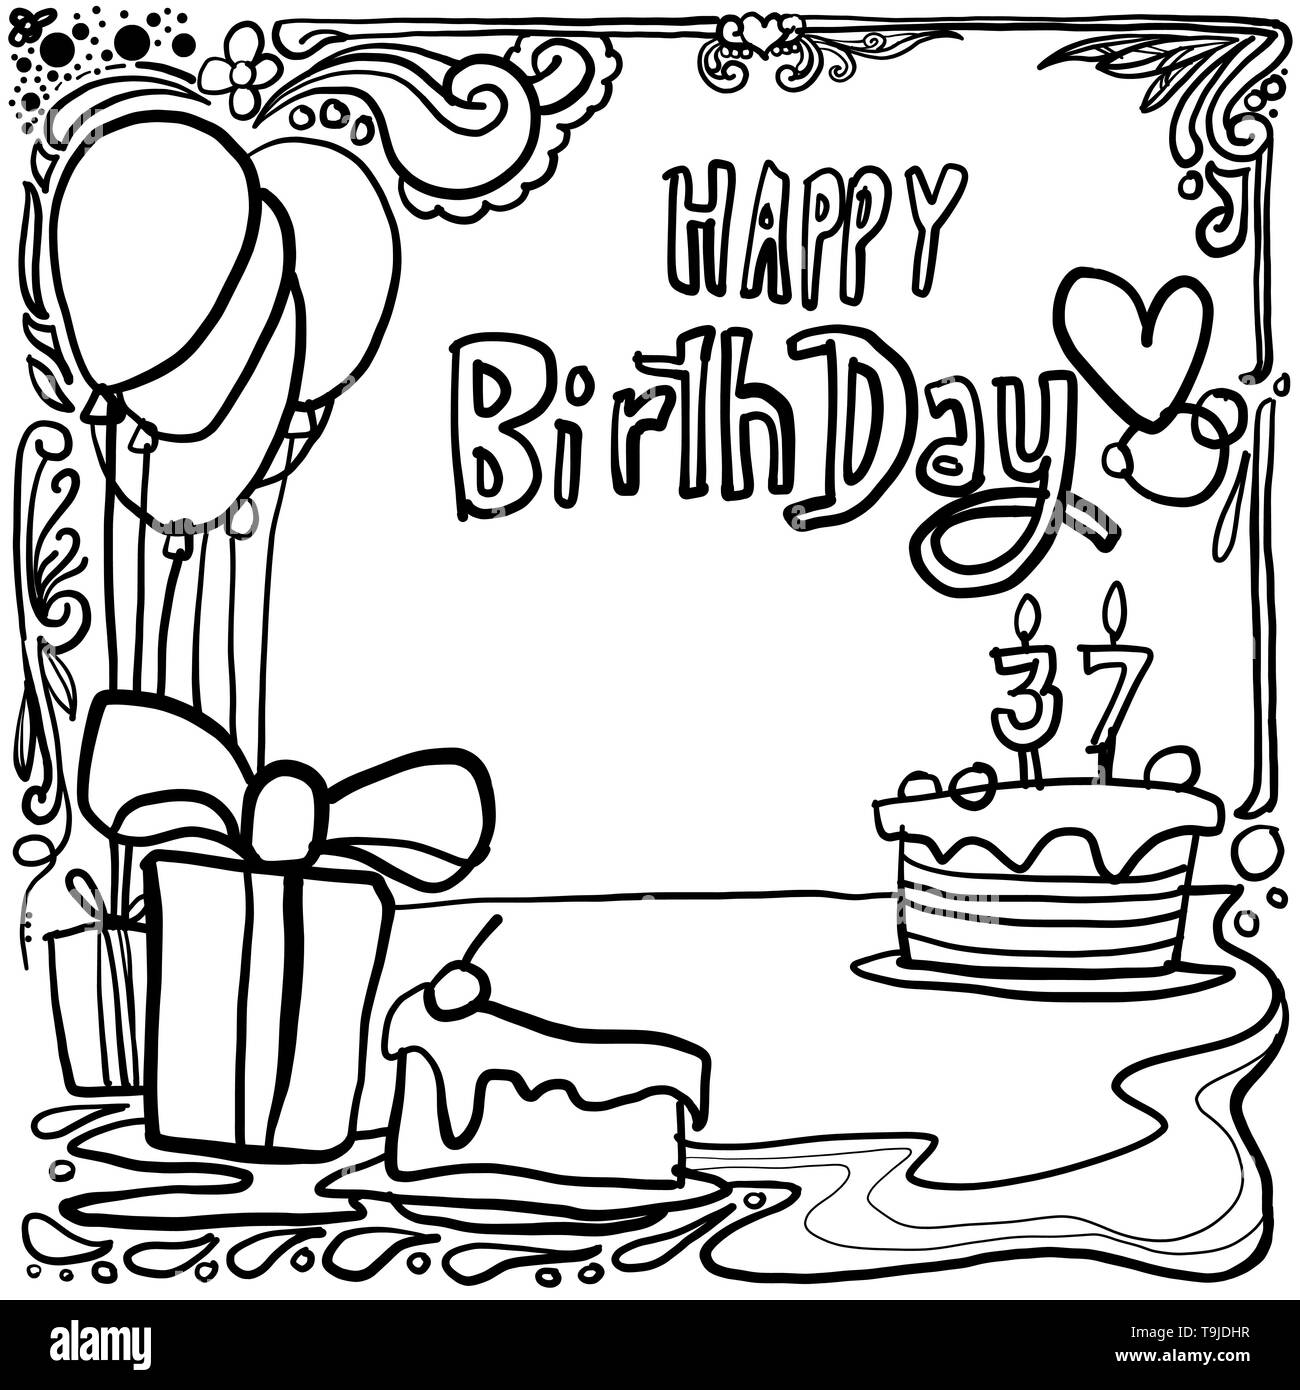 Happy birthday to you drawing Royalty Free Vector Image-saigonsouth.com.vn